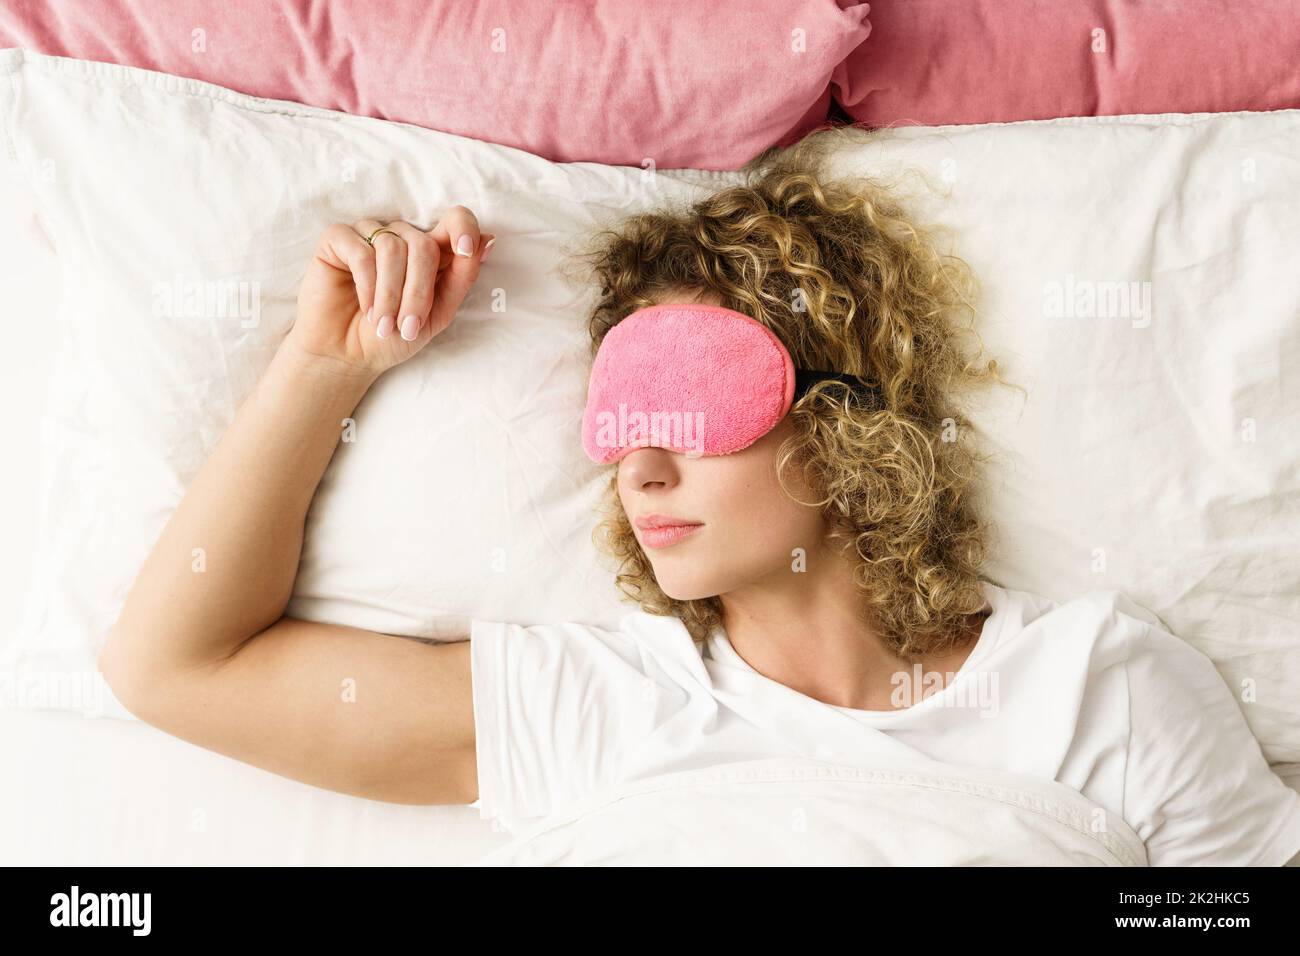 Beautiful woman sleeping with a pink blindfold on her eyes Stock Photo